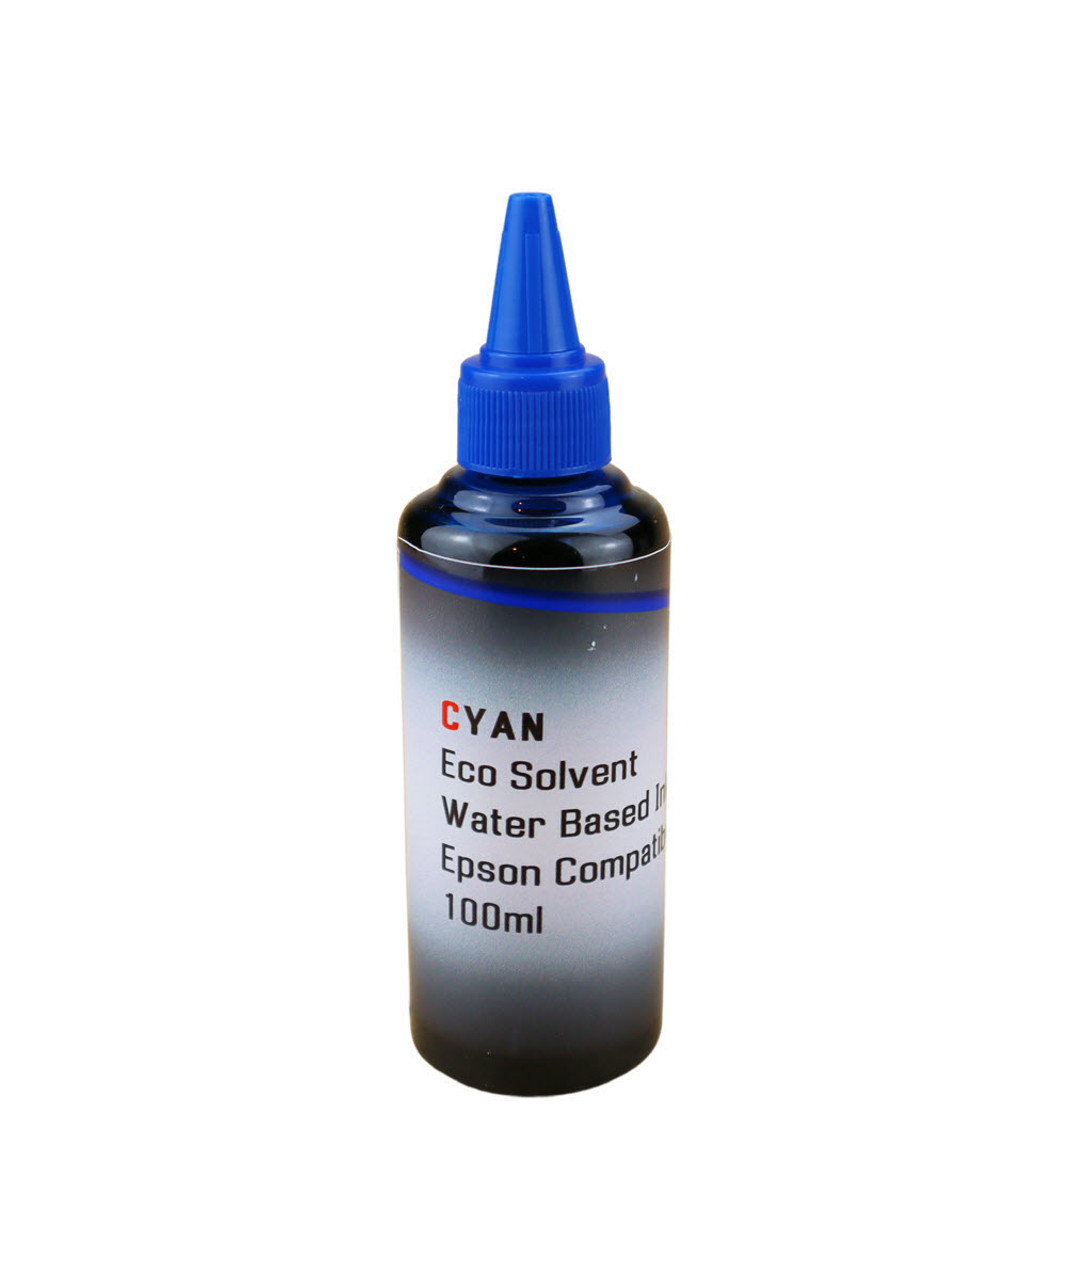 Cyan Water Based Eco Solvent Ink 100ml Bottle for Epson WorkForce Pro WF-7310, WF-7820, WF-7840 Printers